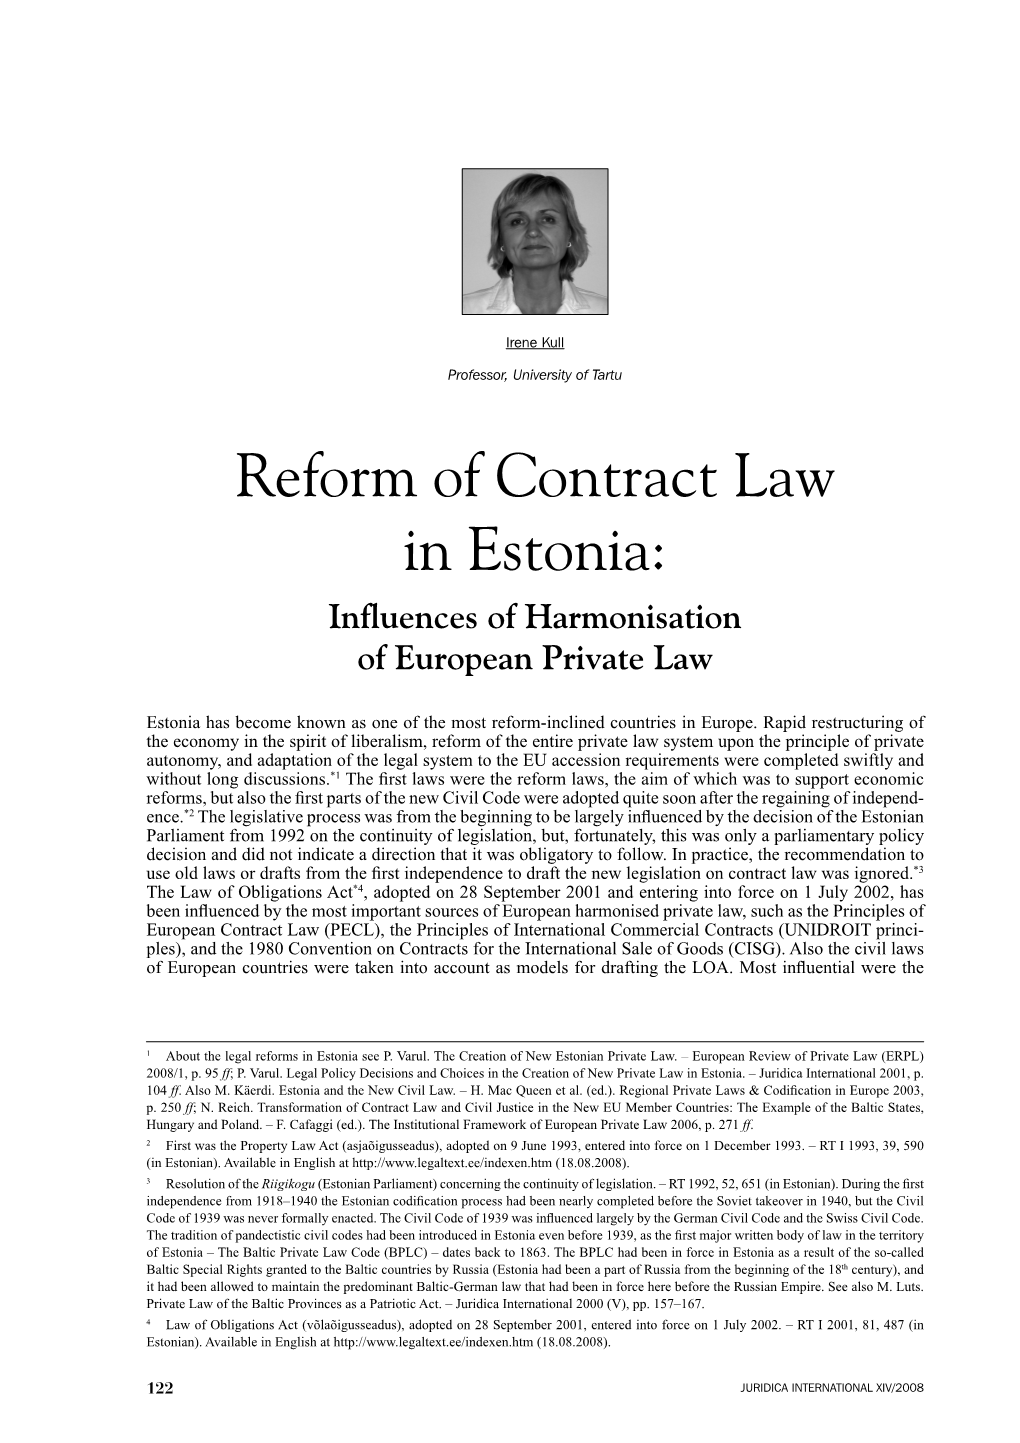 Reform of Contract Law in Estonia: Influences of Harmonisation of European Private Law